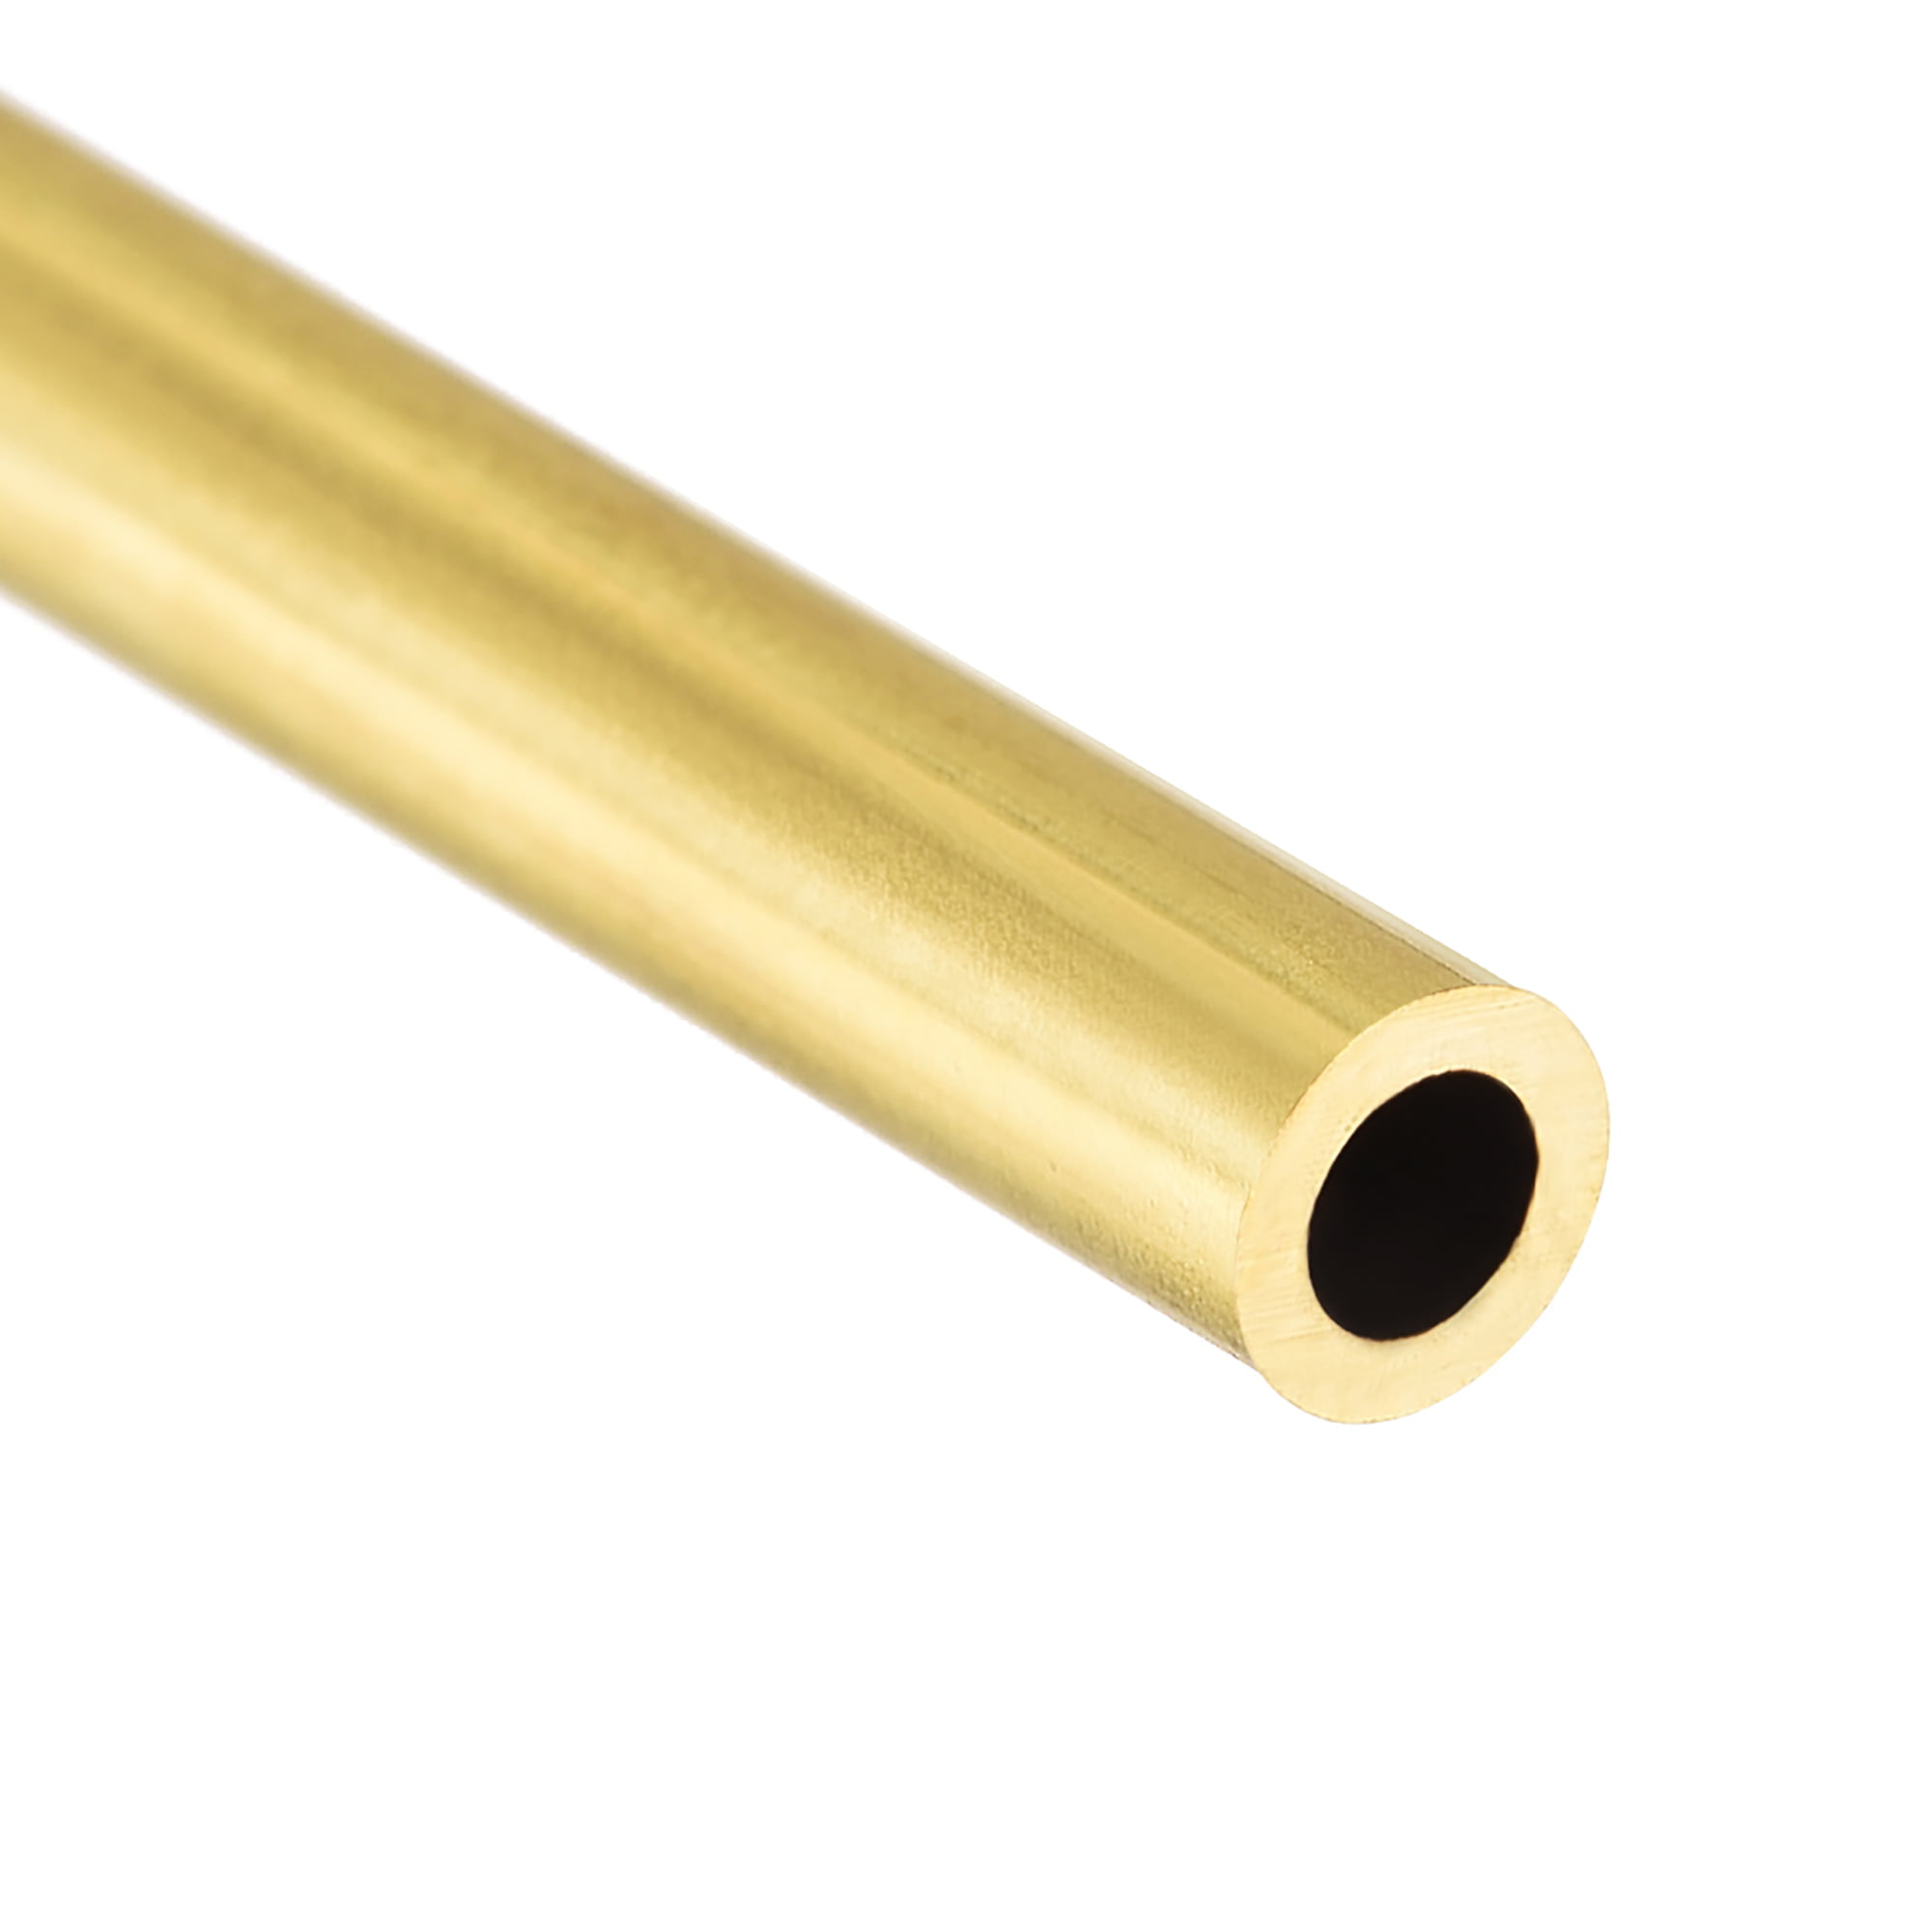 300mm Length 3mm OD 0.75mm Wall Thickness uxcell Brass Round Tube Seamless Straight Pipe Tubing 3 Pcs